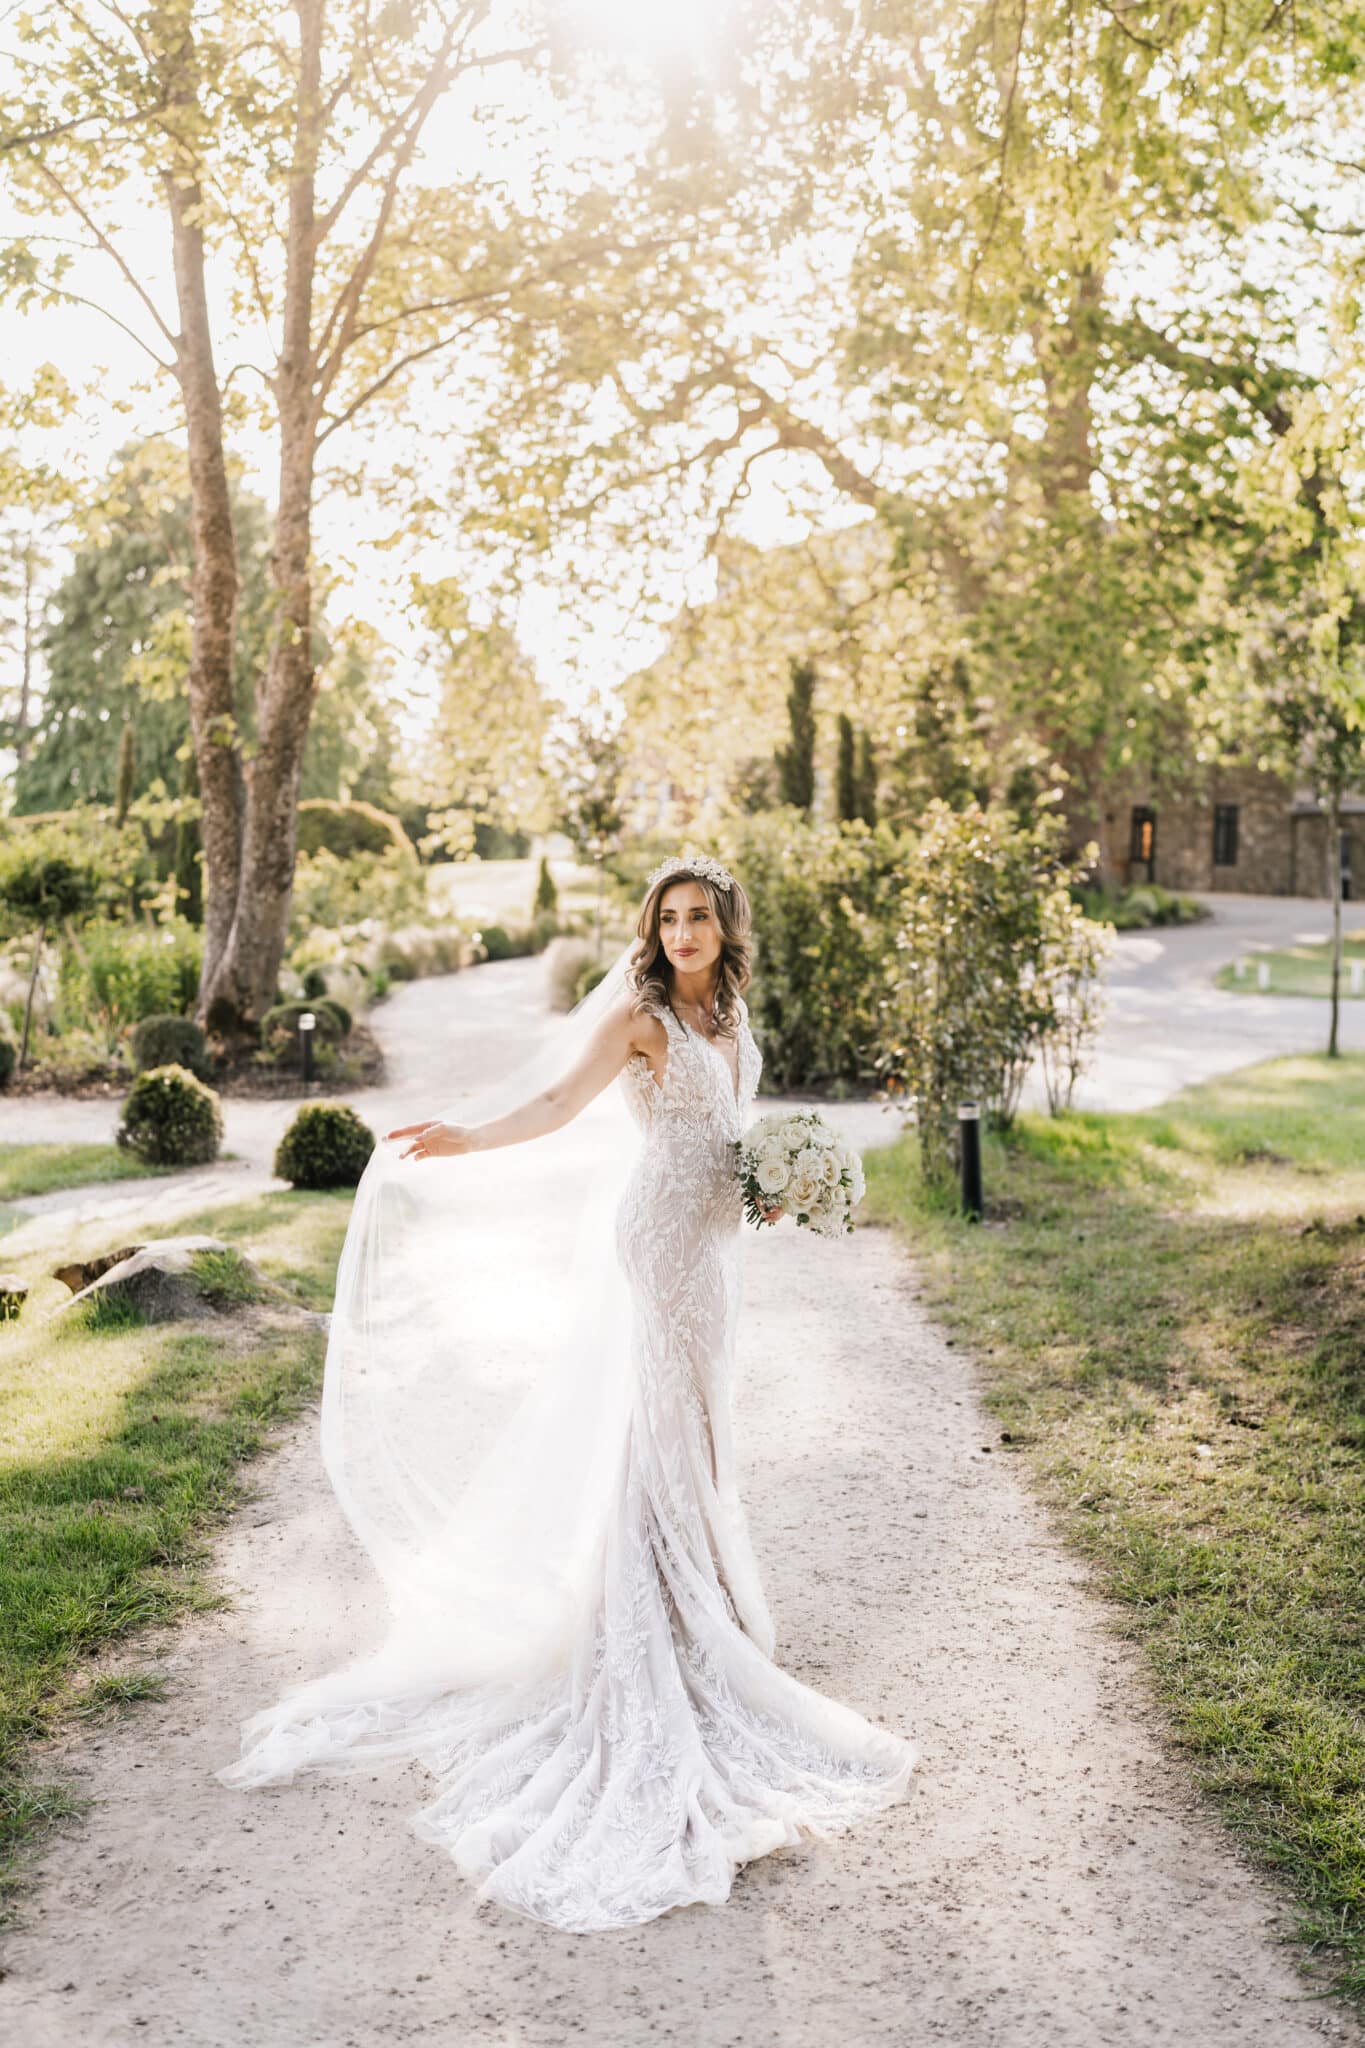 A bride in a detailed lace gown holds her veil flowing in the breeze, standing on a garden path with sunlight filtering through trees. she holds a bouquet, looking over her shoulder.